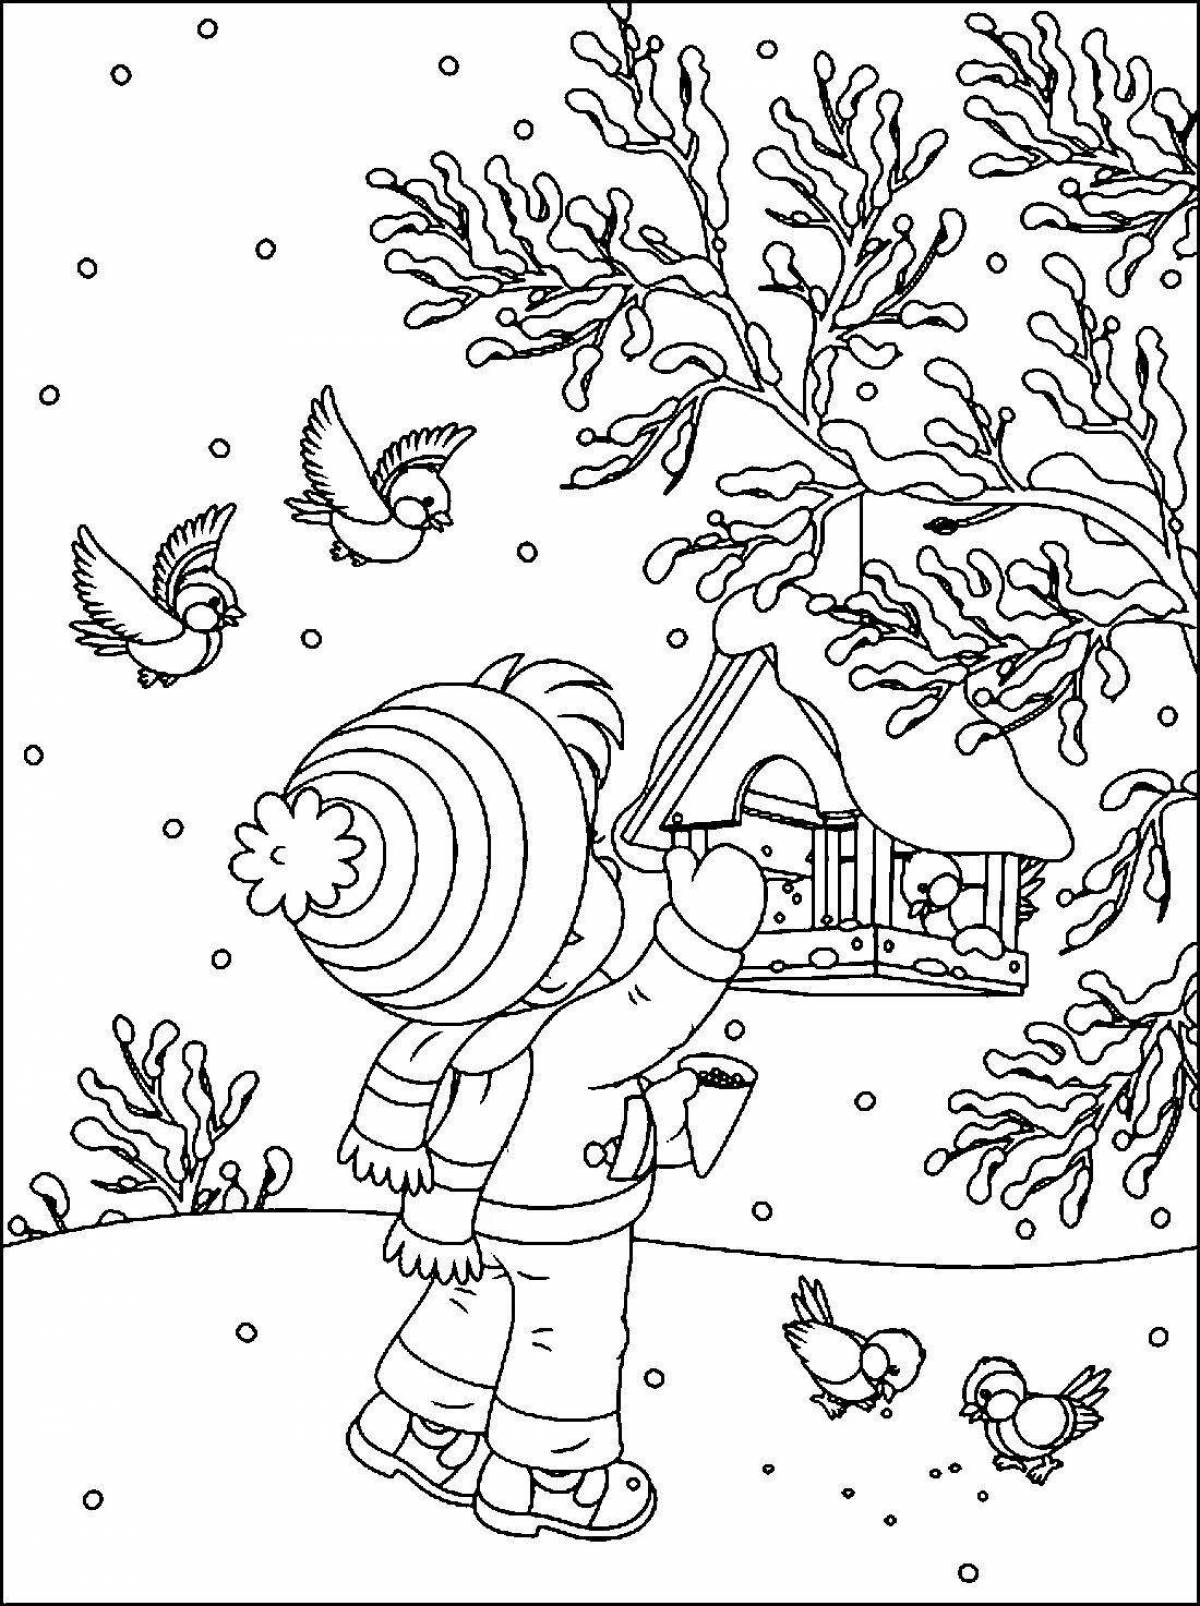 Stimulating trough coloring book for kids